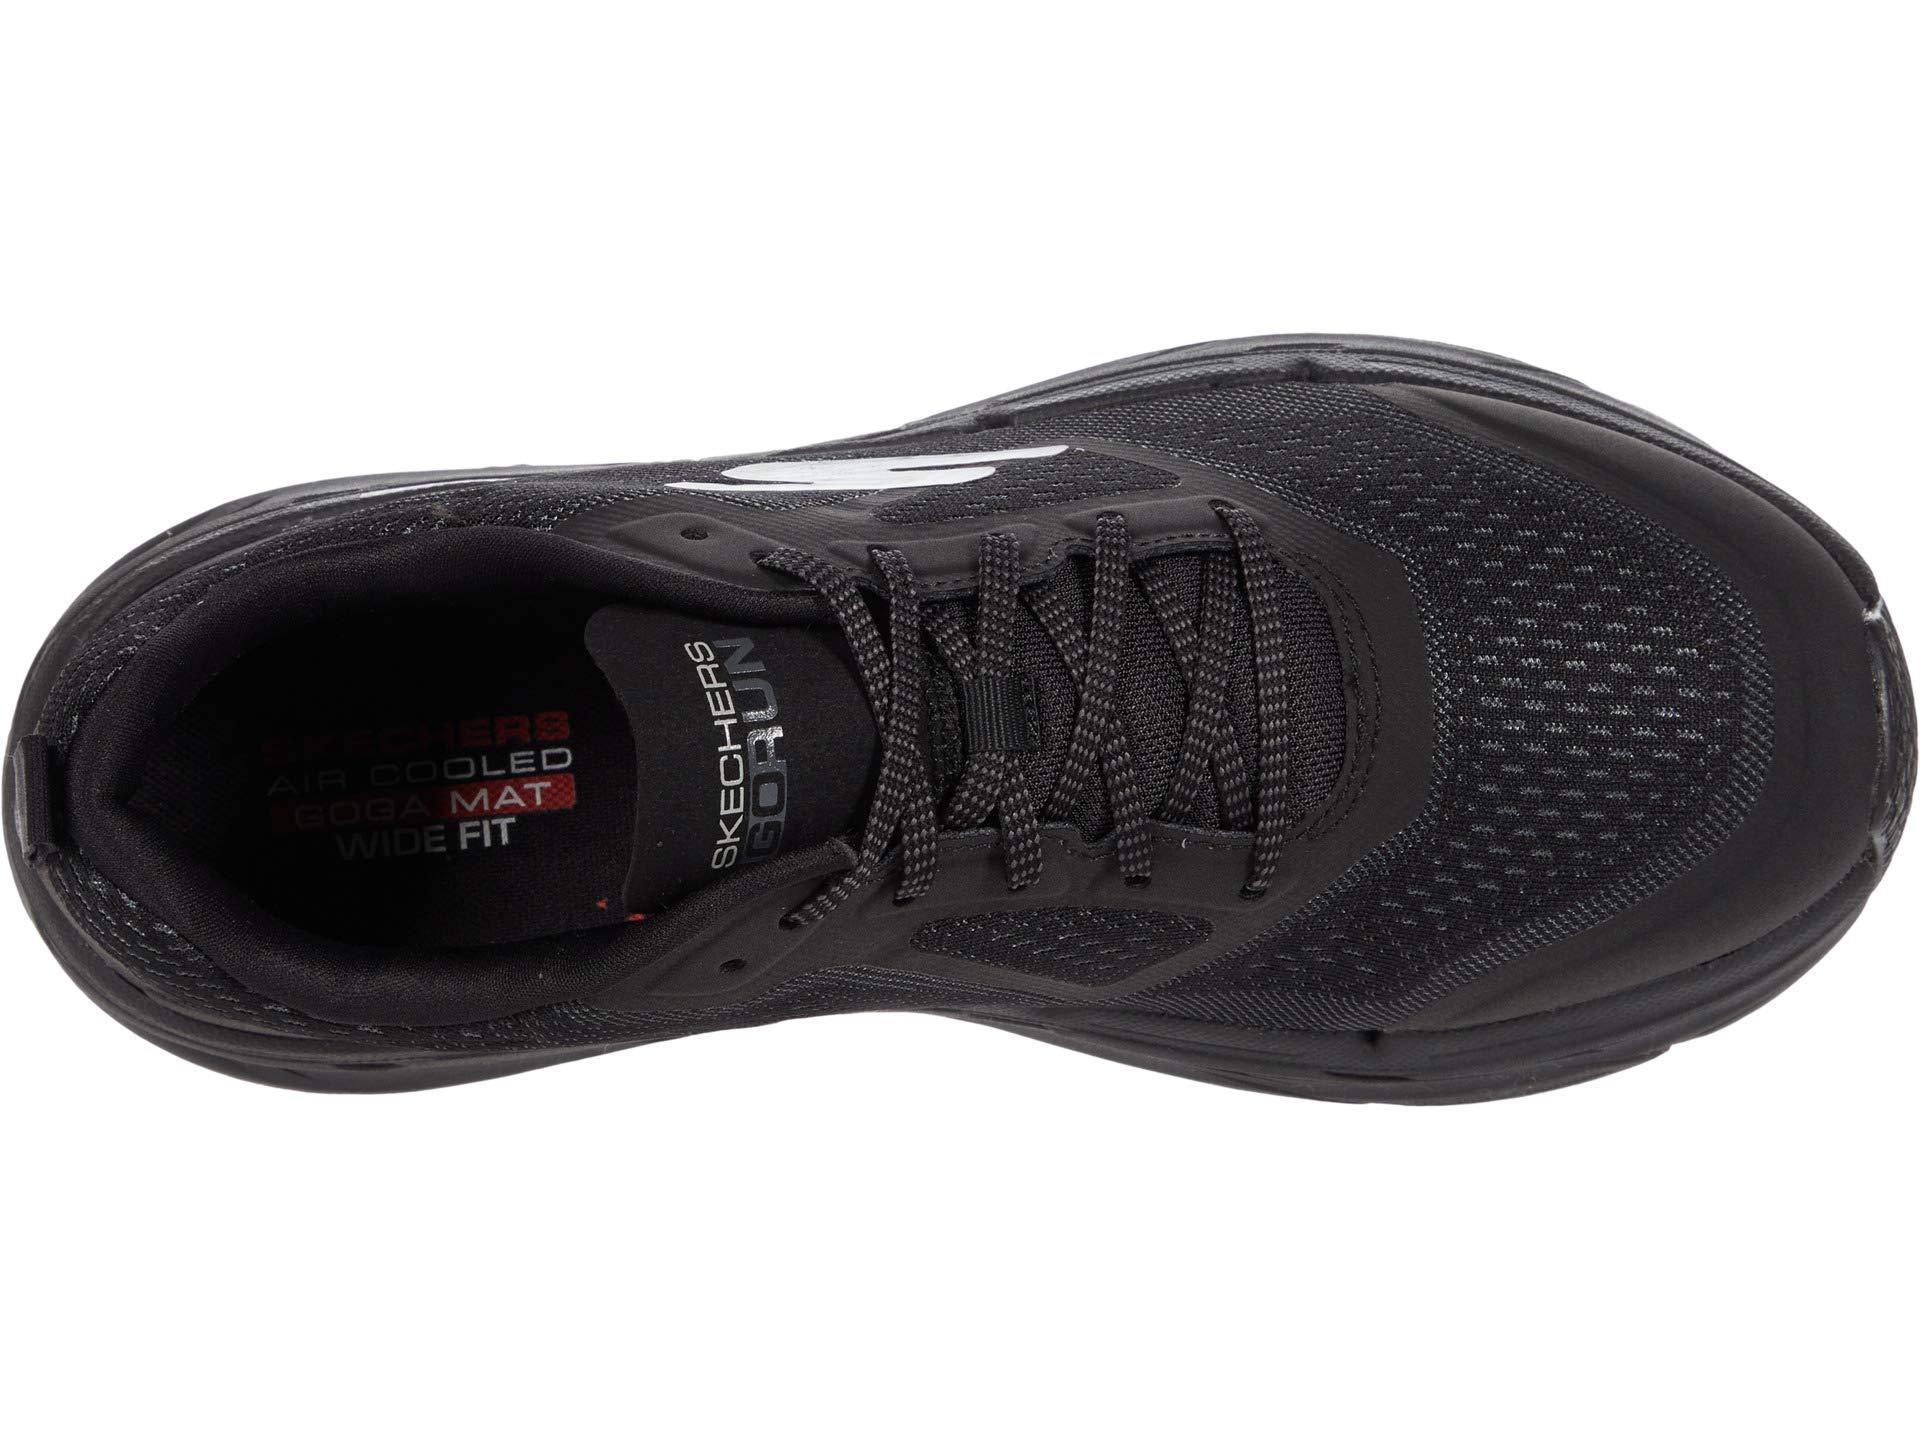 Skechers Synthetic Max Cushioning Premier - Vantage in Black for Men - Lyst